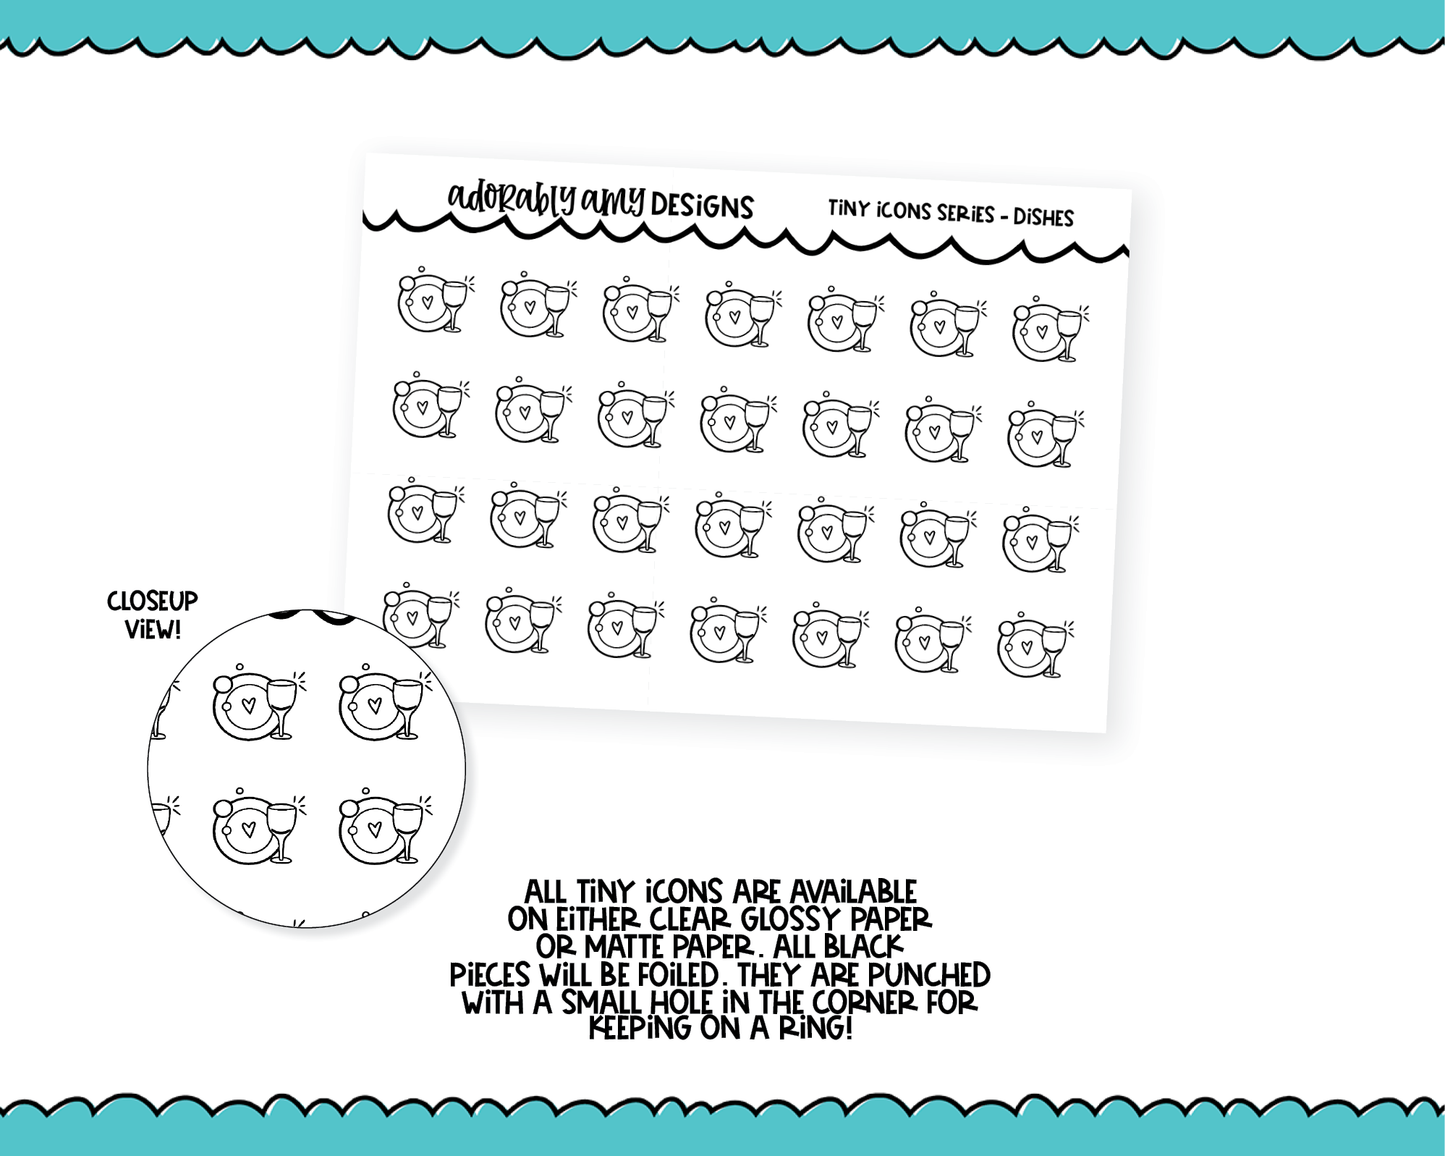 Foiled Tiny Icon Series - Dishes Tiny Size Planner Stickers for any Planner or Insert